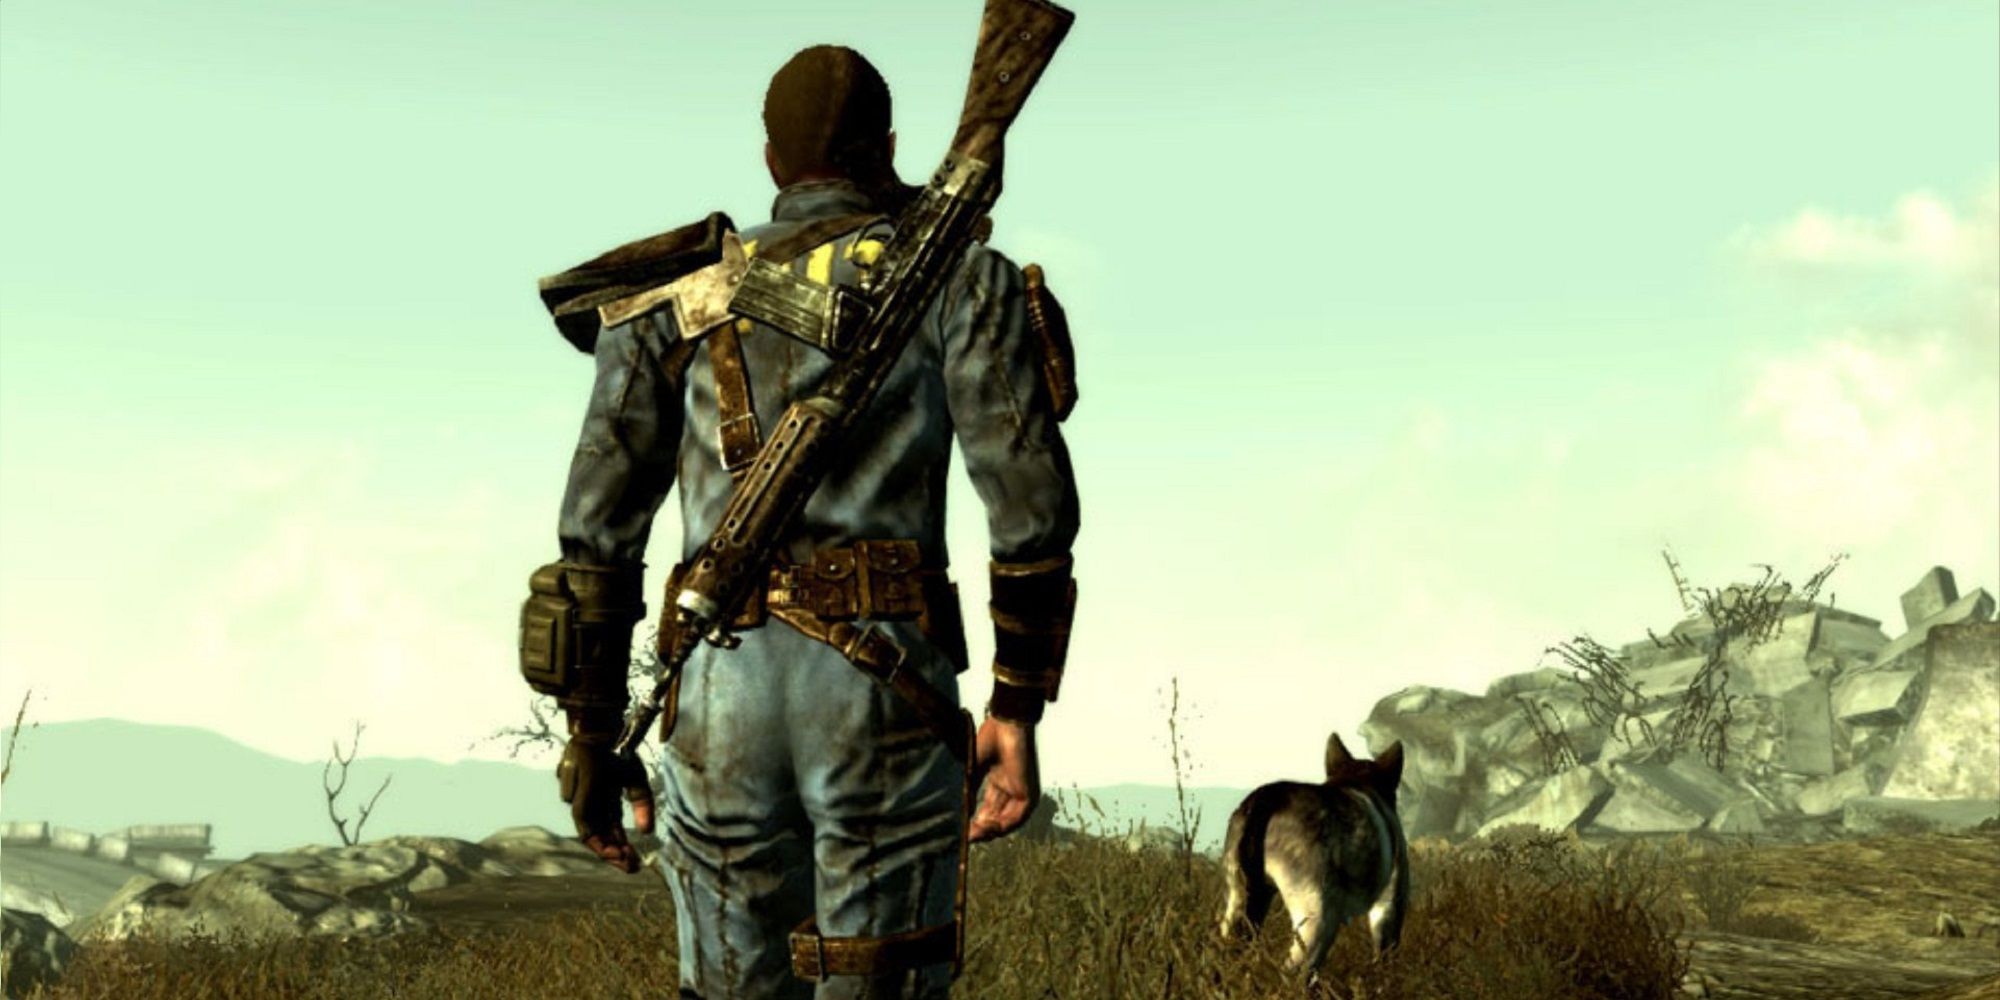 Fallout 3 protagonist following his dog in wasteland